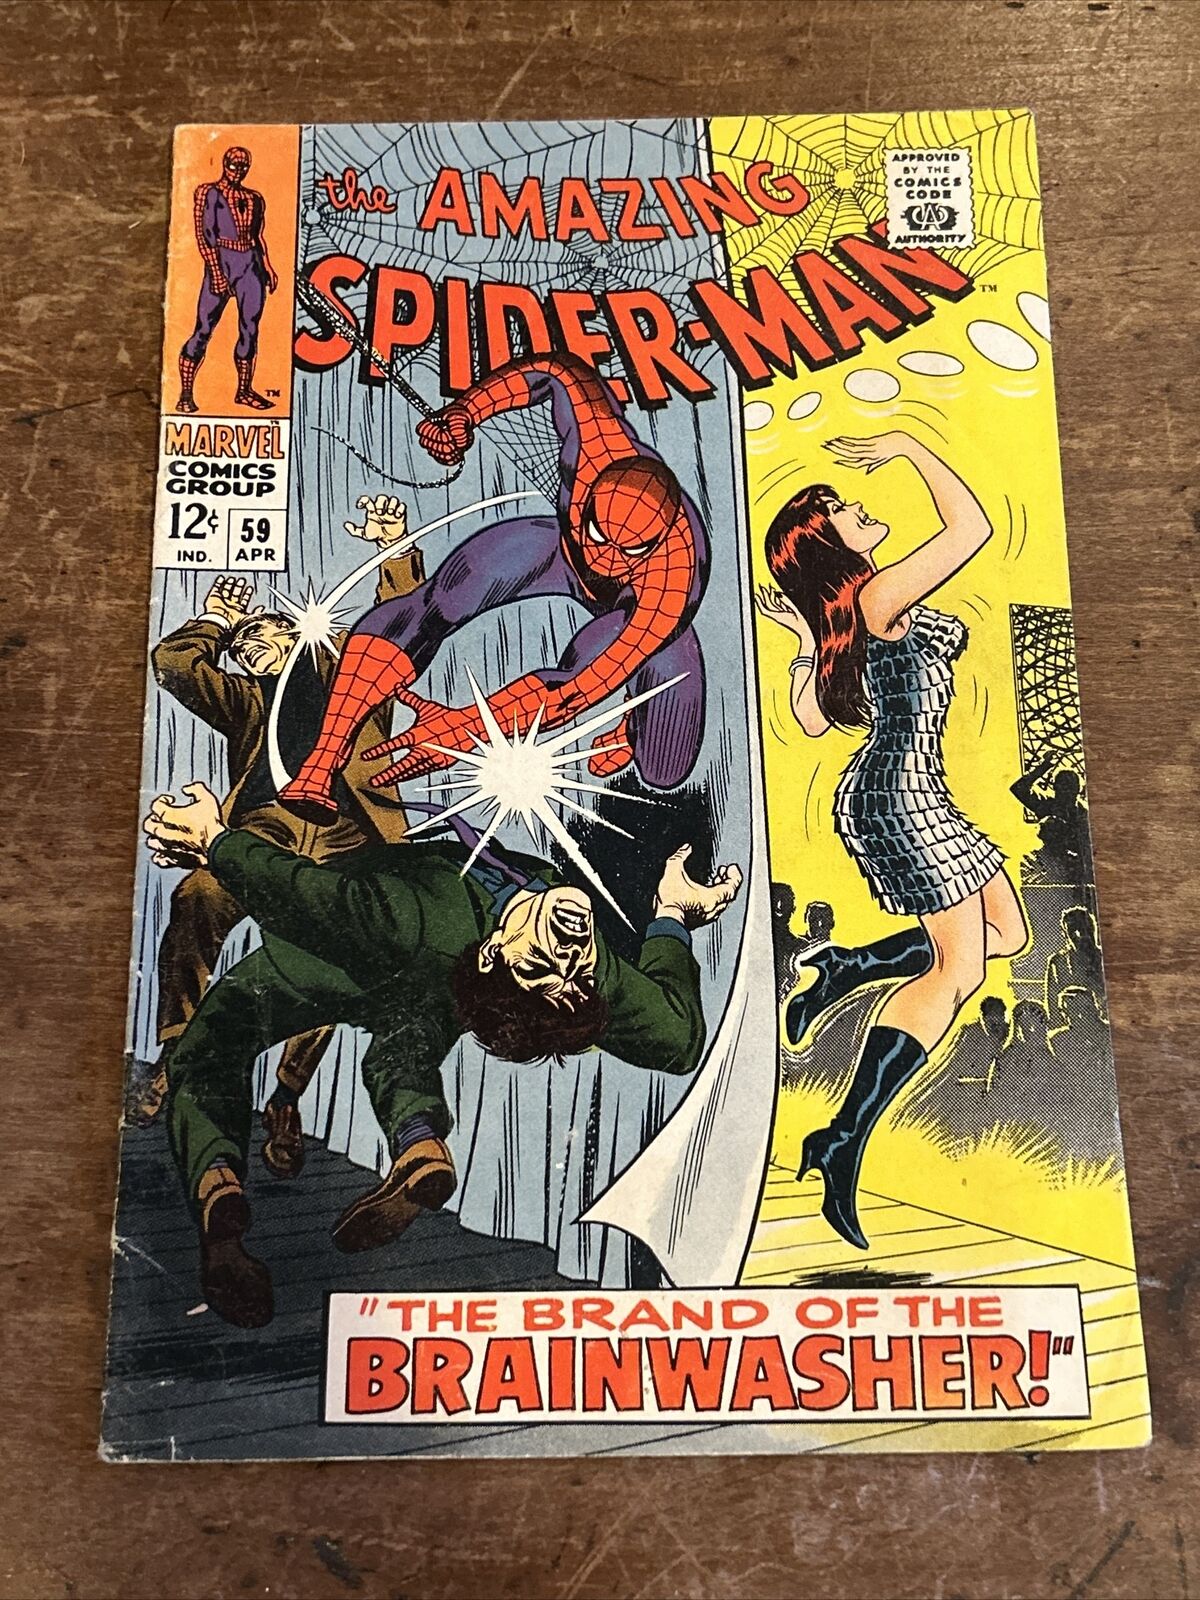 Amazing Spider-Man #59 - First Mary Jane Cover Marvel Comics 1967 (HB) 44 Key